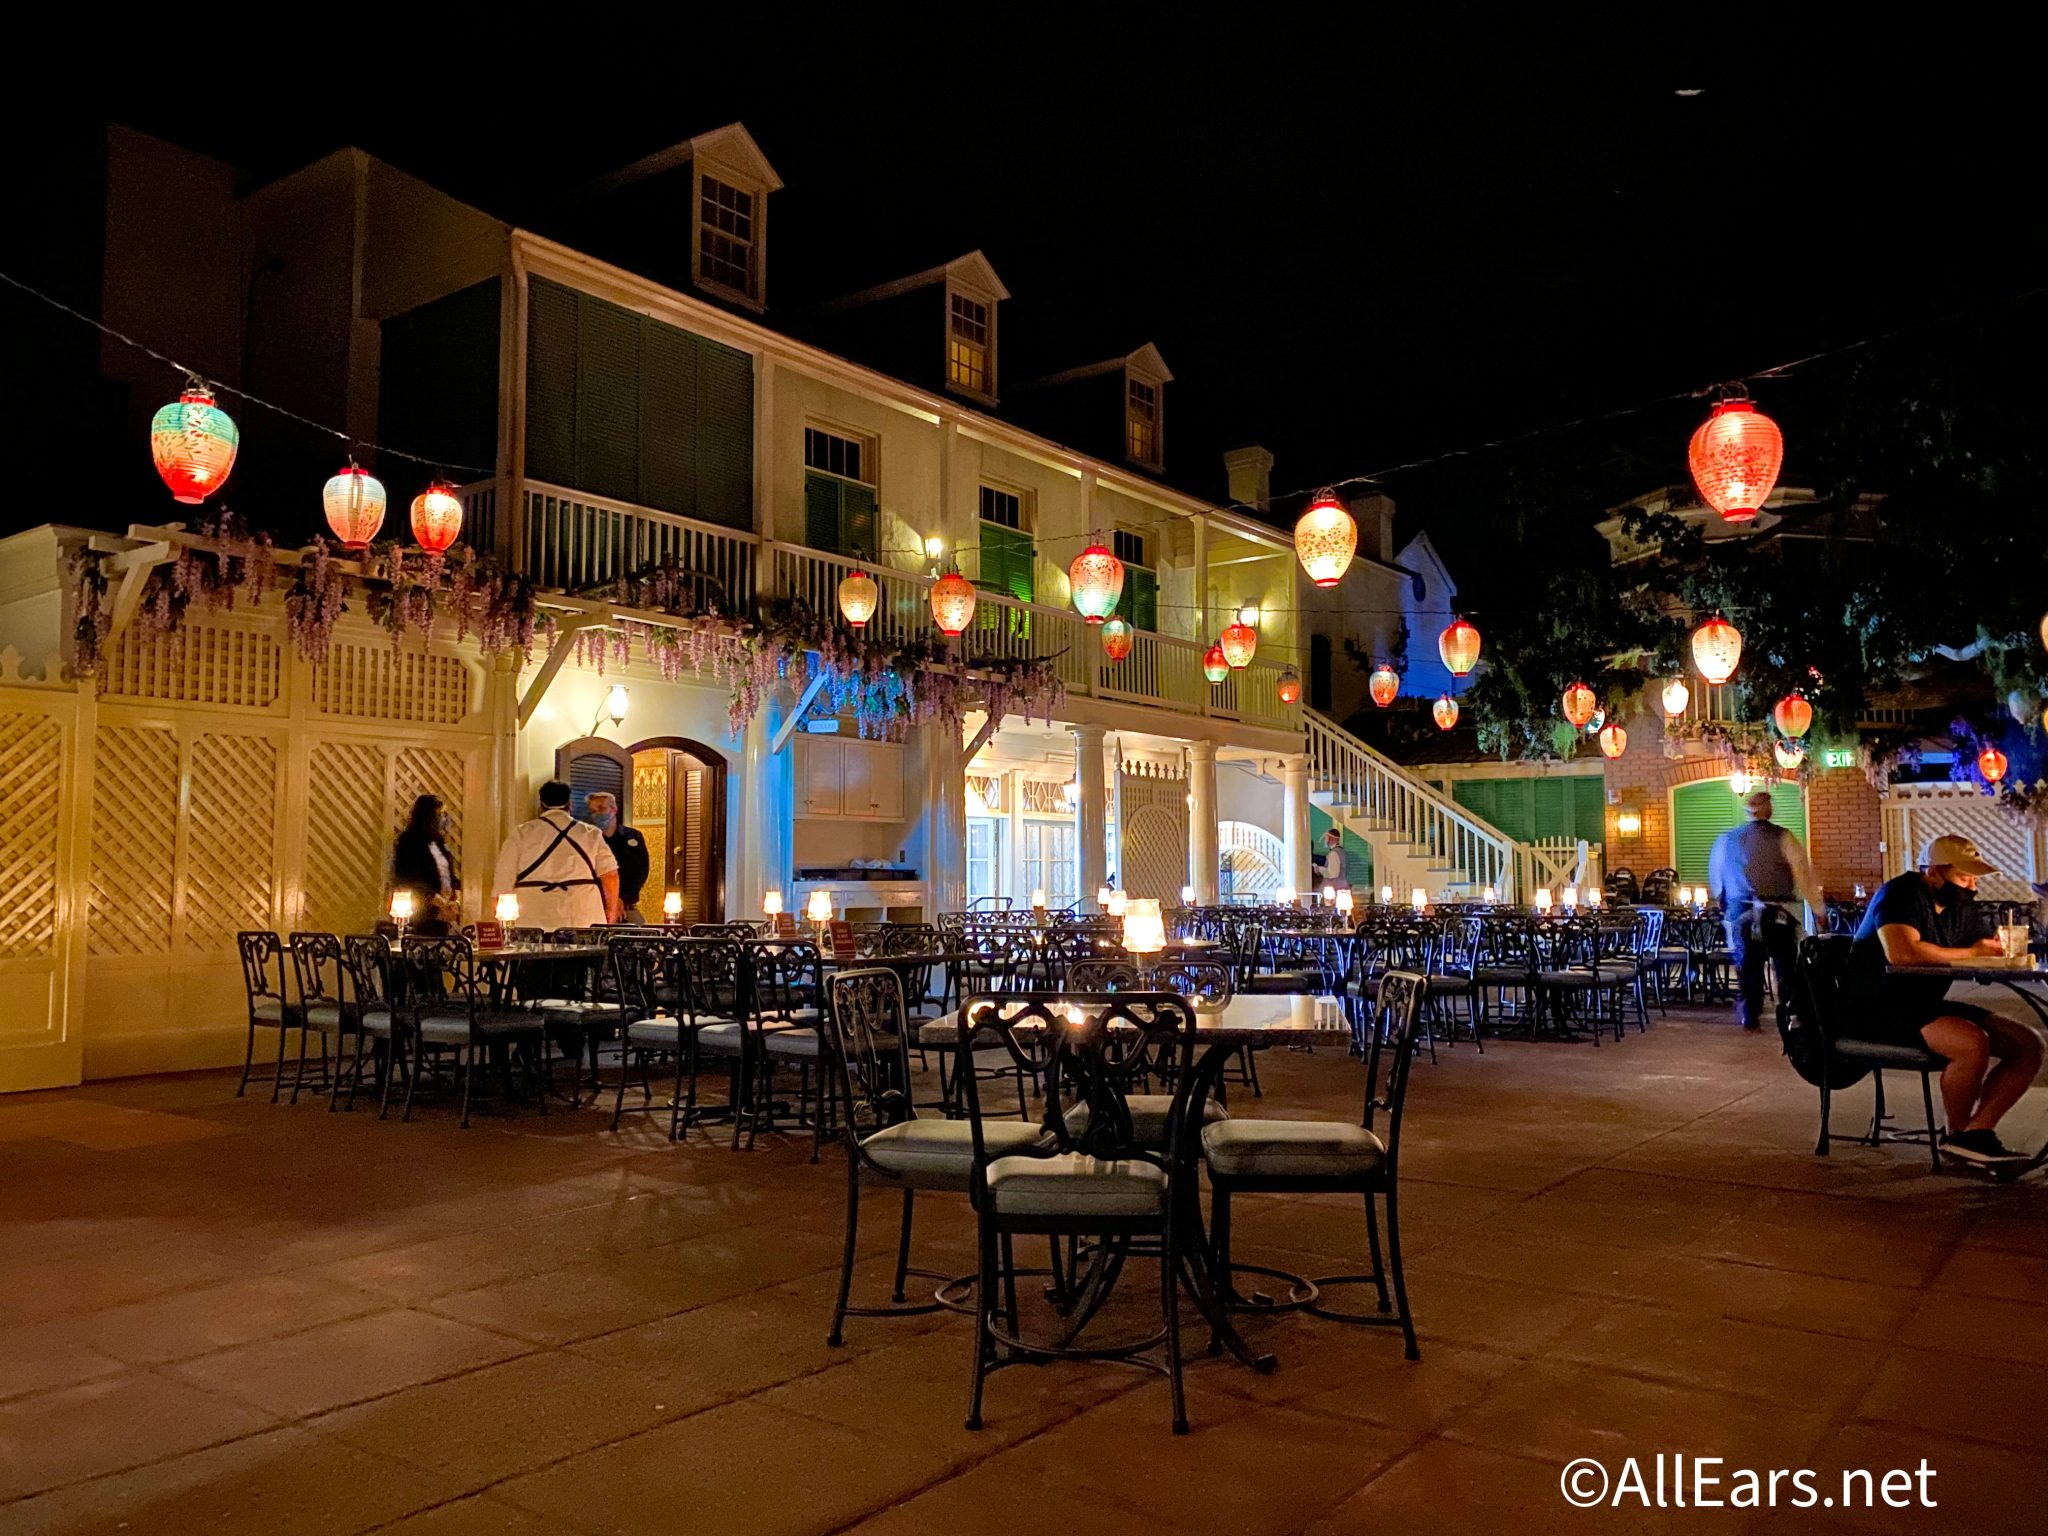 PHOTOS: First Look at the Reopened Blue Bayou Restaurant in Disneyland